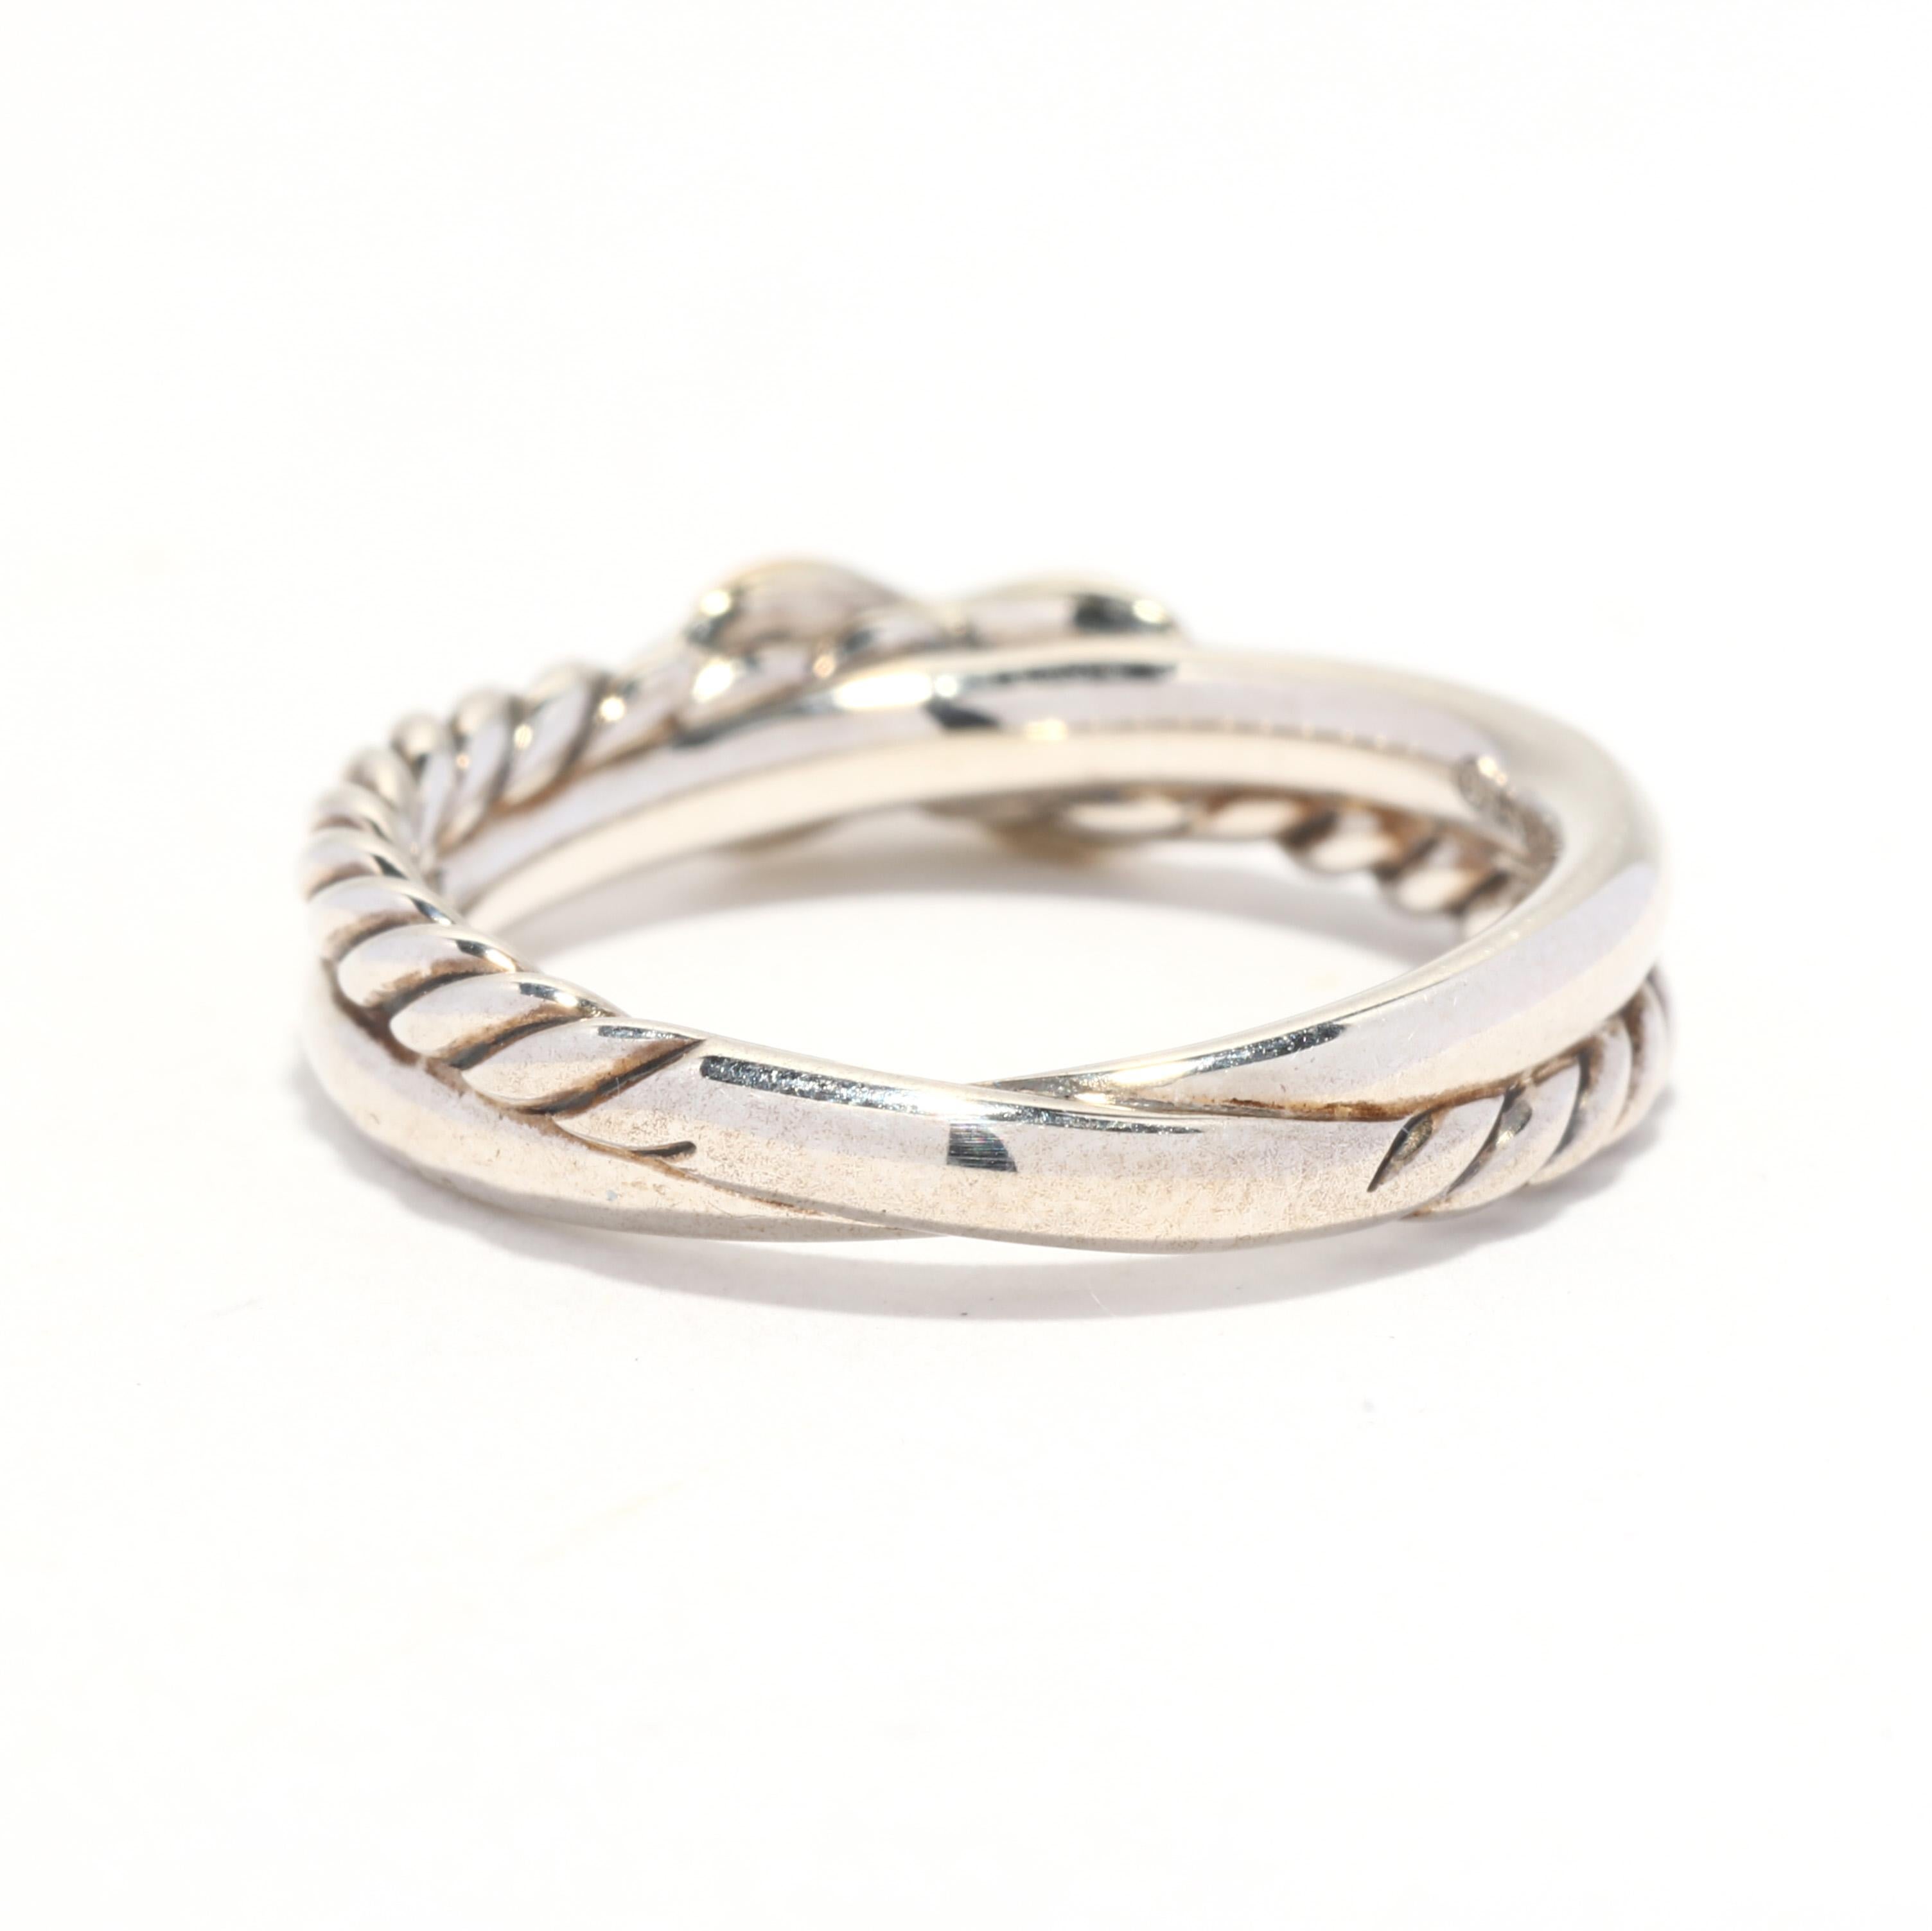 x crossover band ring in sterling silver with 18k yellow gold